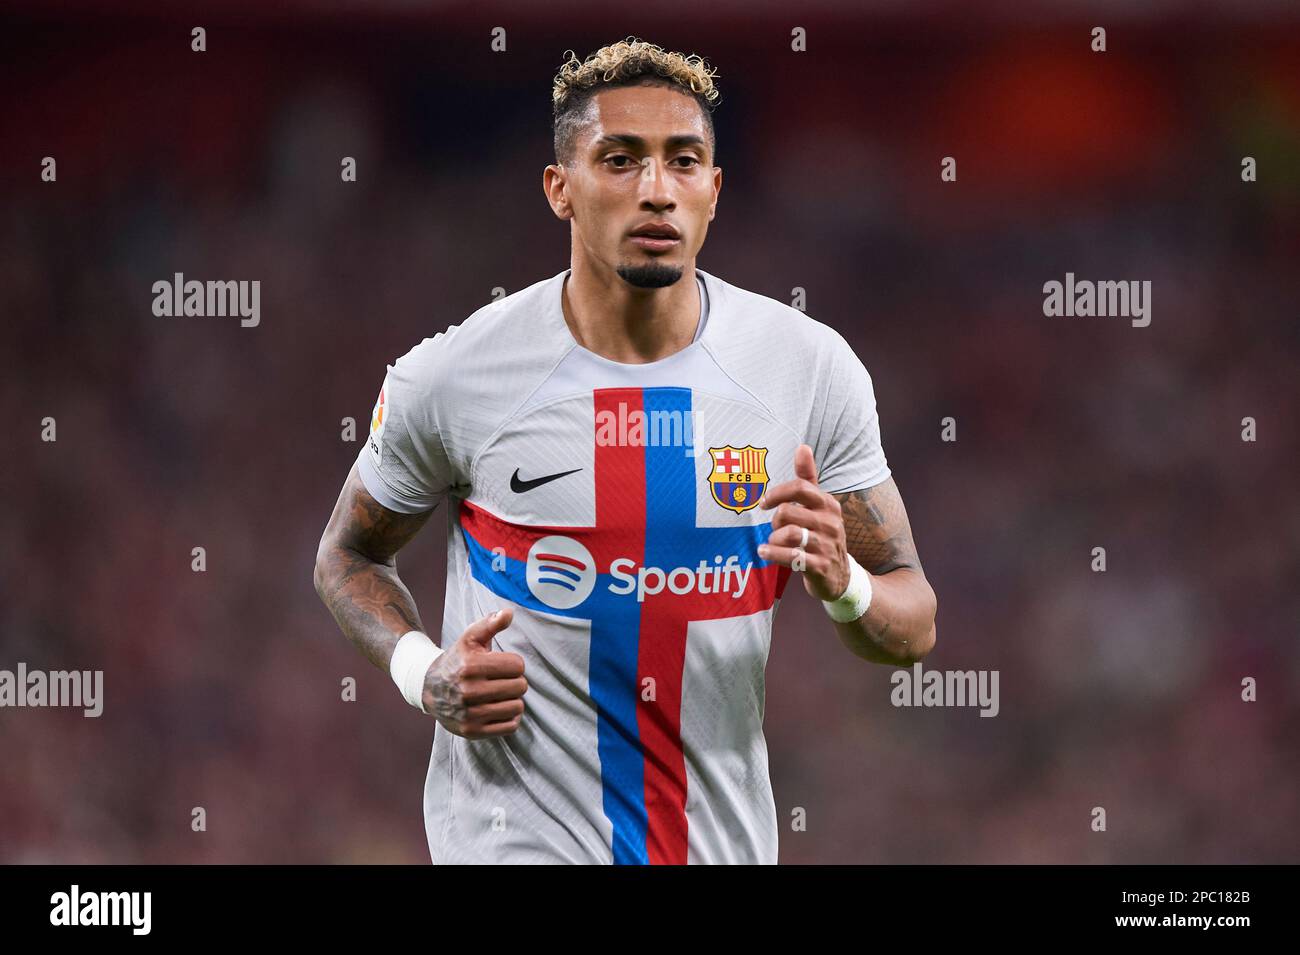 Bilbao, Spain. March 12, 2023, Raphael Dias 'Raphinha' of FC Barcelona  during the La Liga match between Athletic Club and FC Barcelona played at  San Mames Stadium on March 12, 2023 in